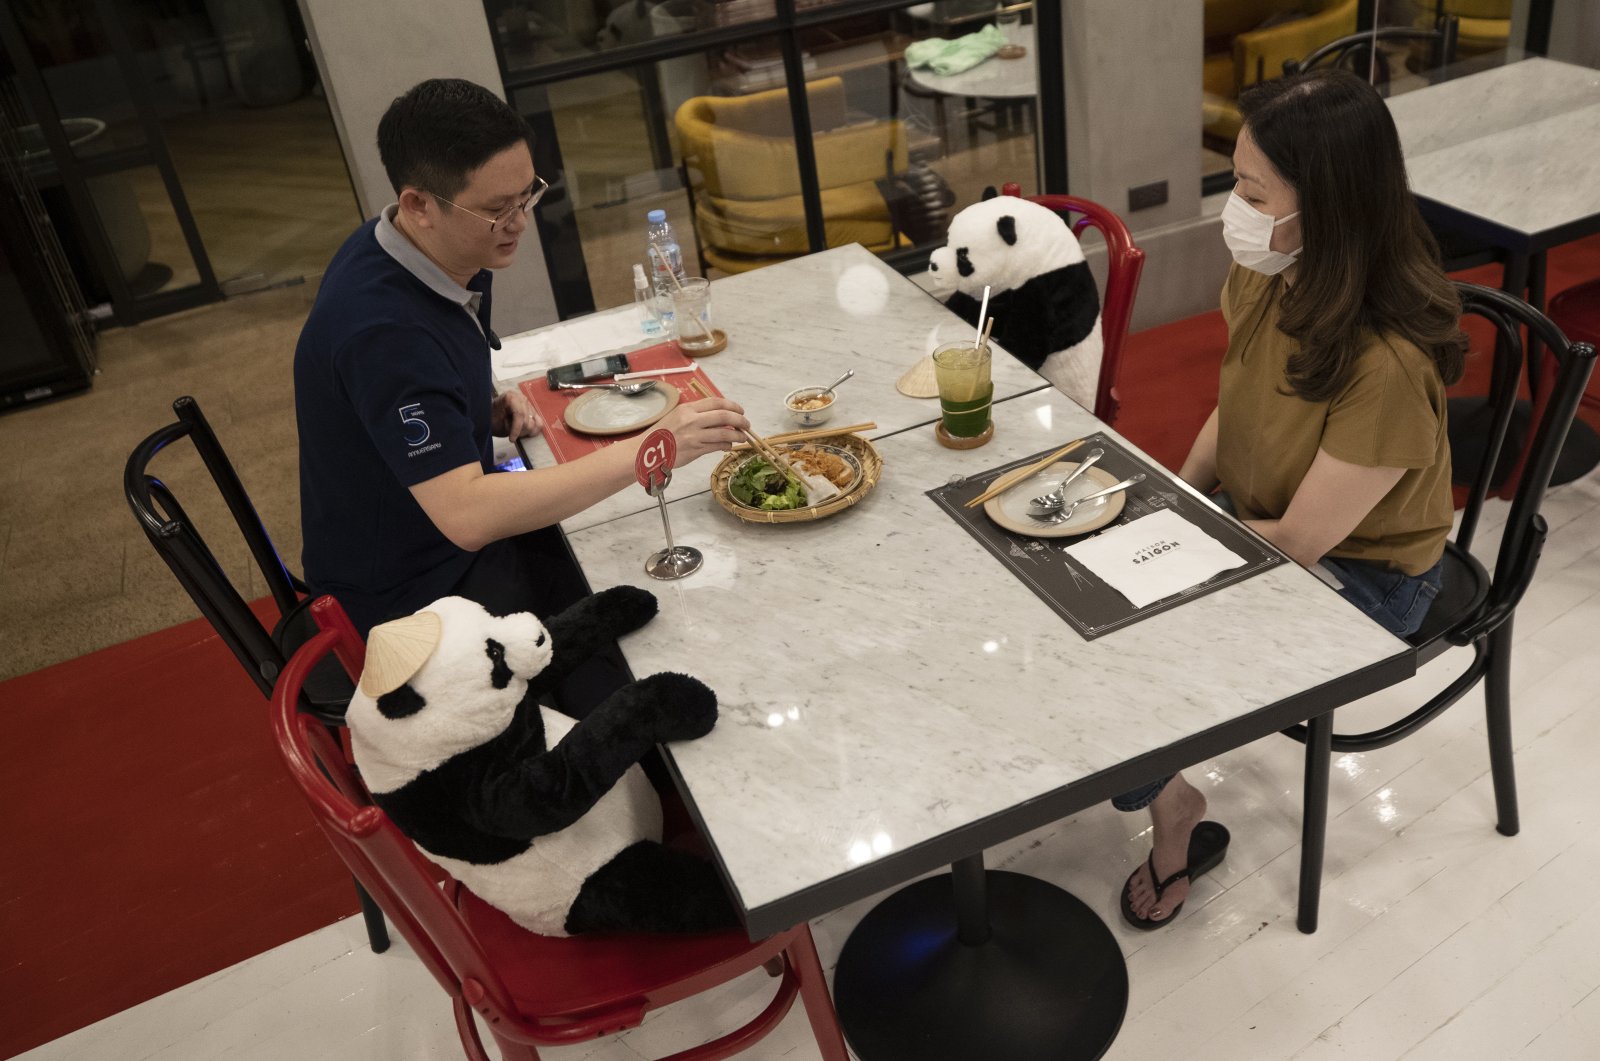 Customers of the Maison Saigon restaurant sit next to stuffed panda dolls the restaurant uses as space keepers for social distancing to help curb the spread of the coronavirus in Bangkok, Thailand, May 5, 2020. (AP Photo)